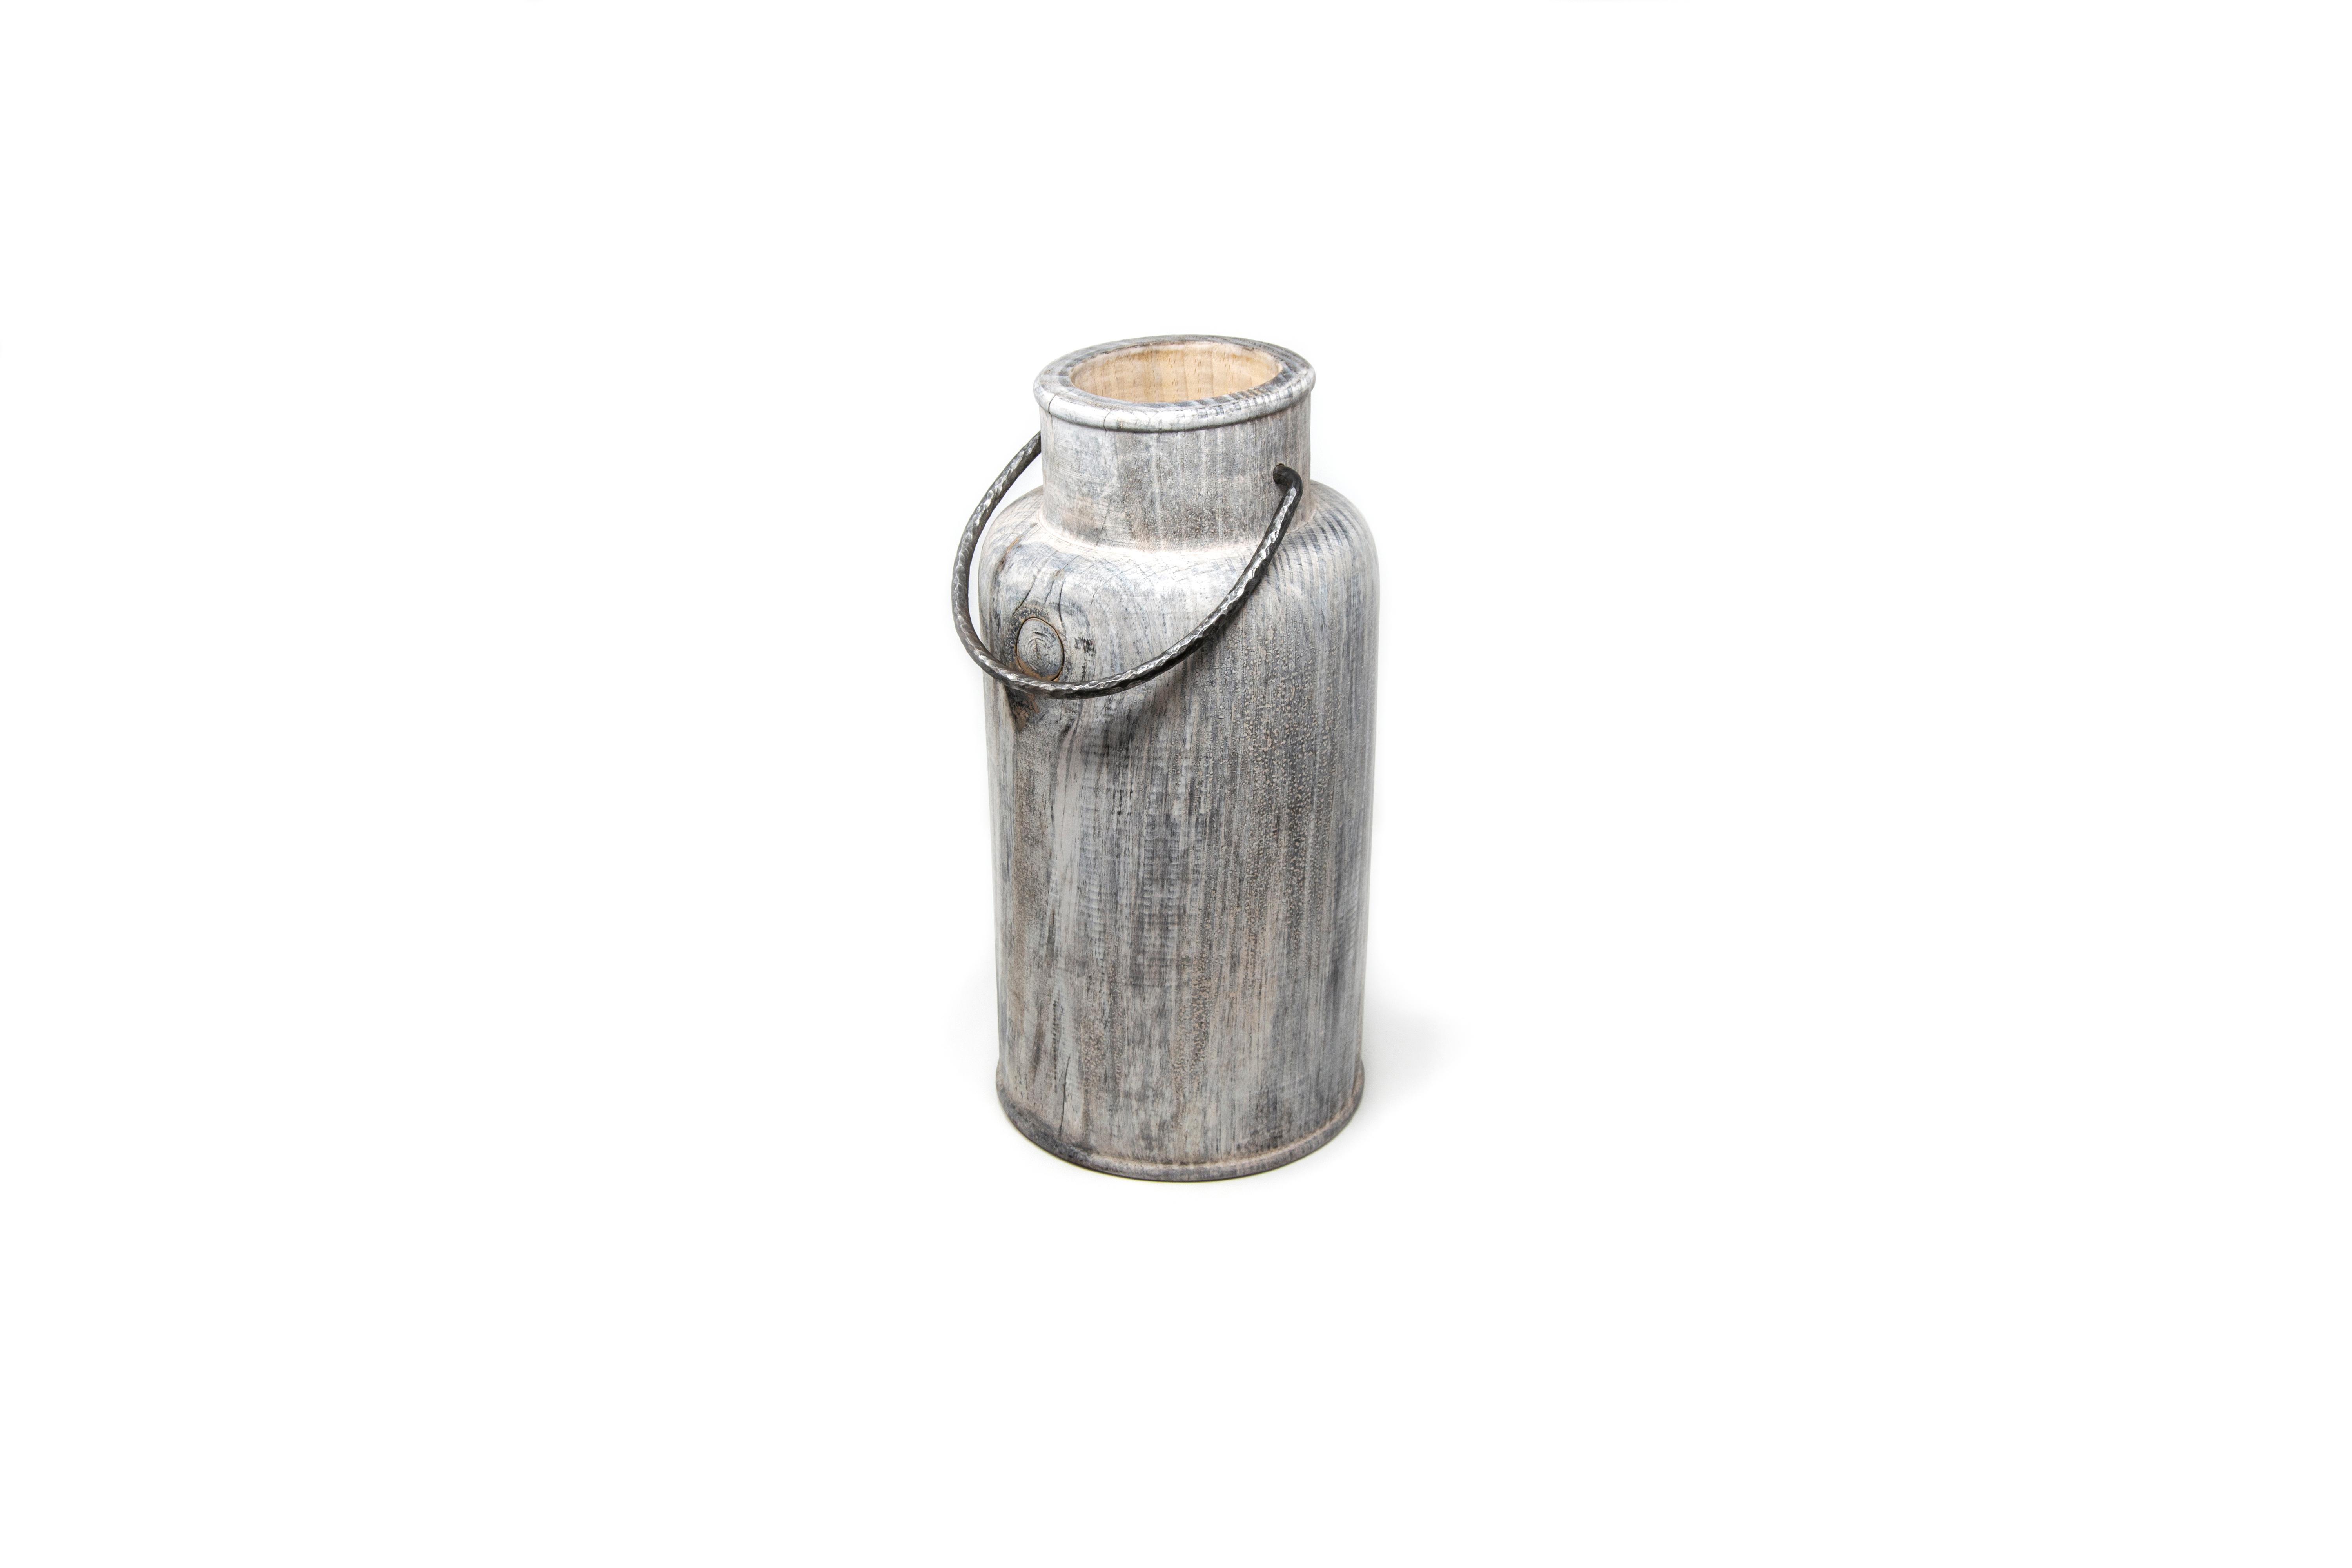 This pine wood vase is designed by the couple Setsu & Shinobu Ito and handmade by the artistic woodturner Lorenzo Franceschinis for Hands on Design. It is inspired by the ancient steel milk containers and the surface finish is made from titanium